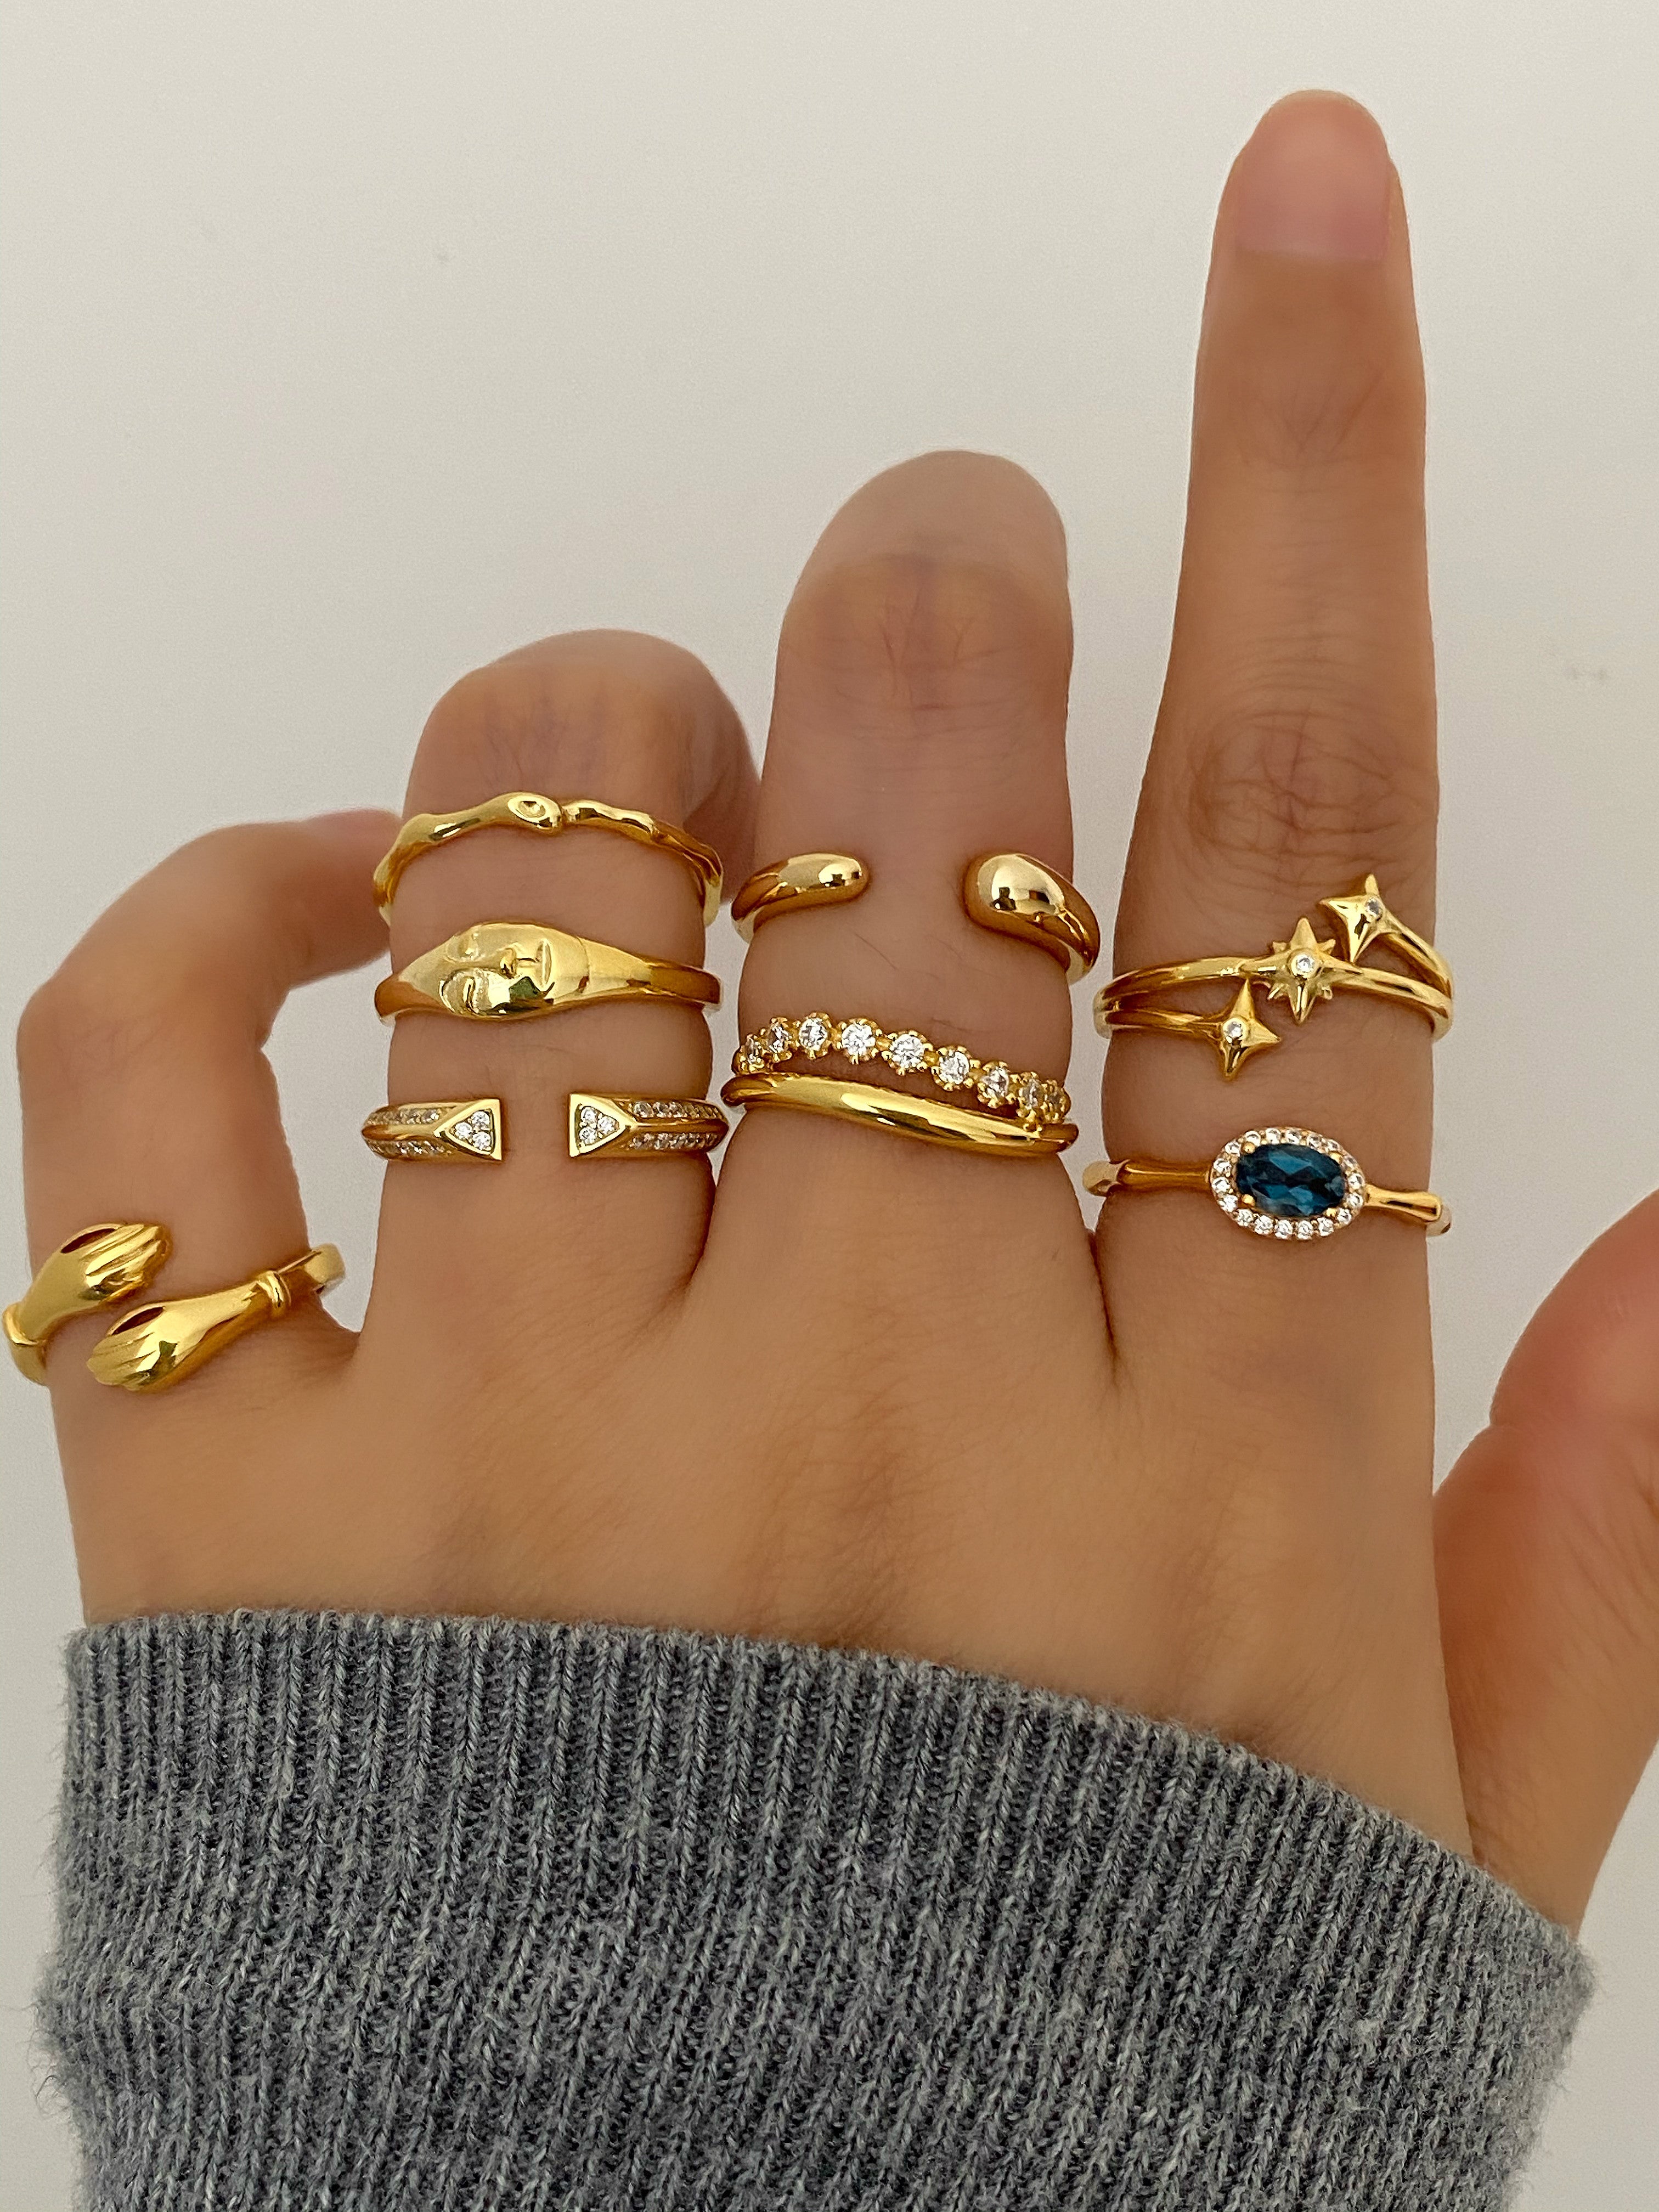 Meideya Jewelry rings gold plated over sterling silver